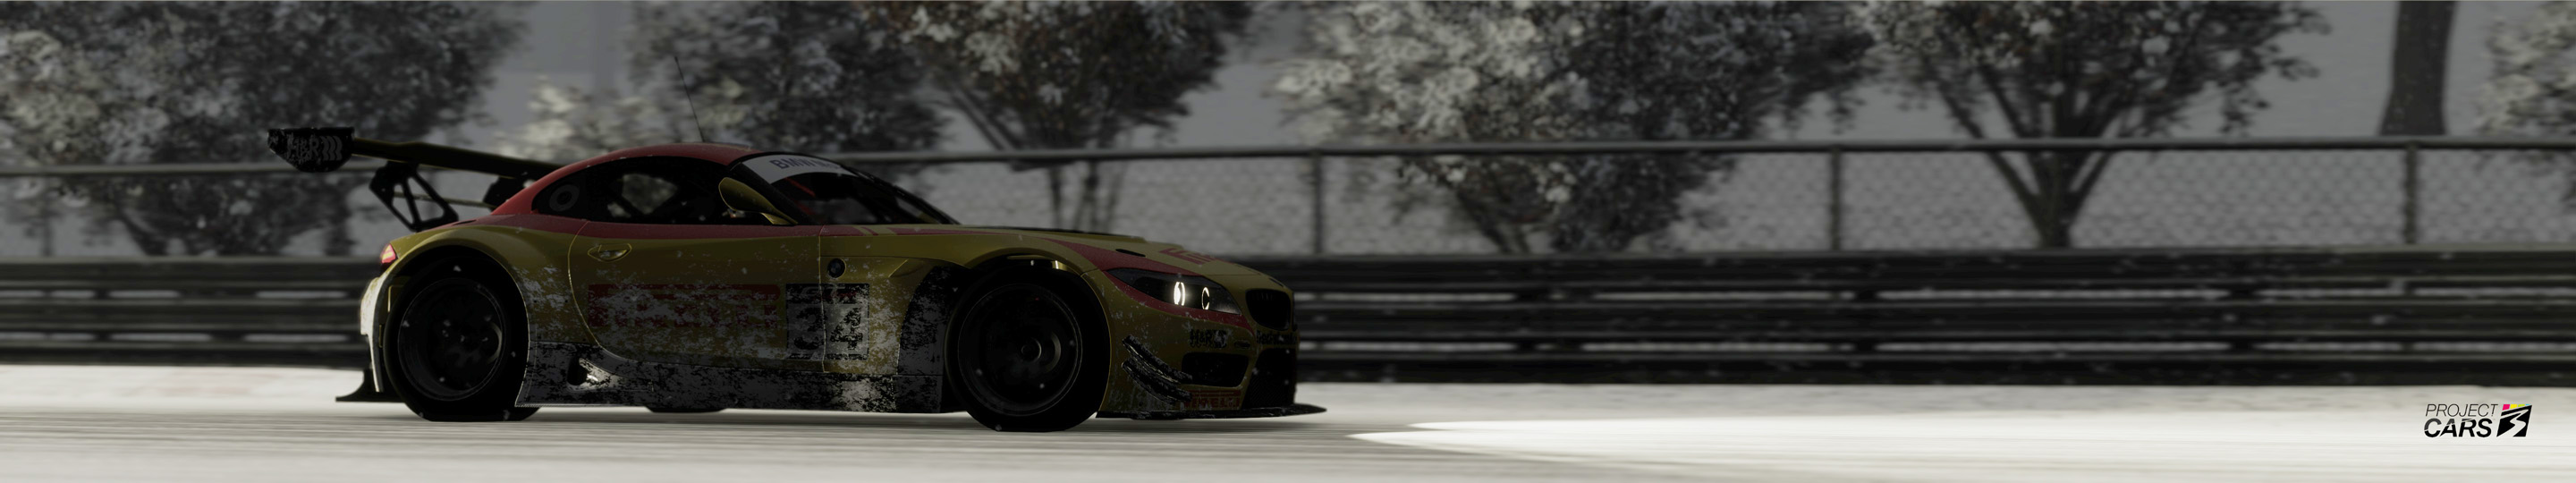 5 PROJECT CARS GT3 at NORDS Snow copy.jpg